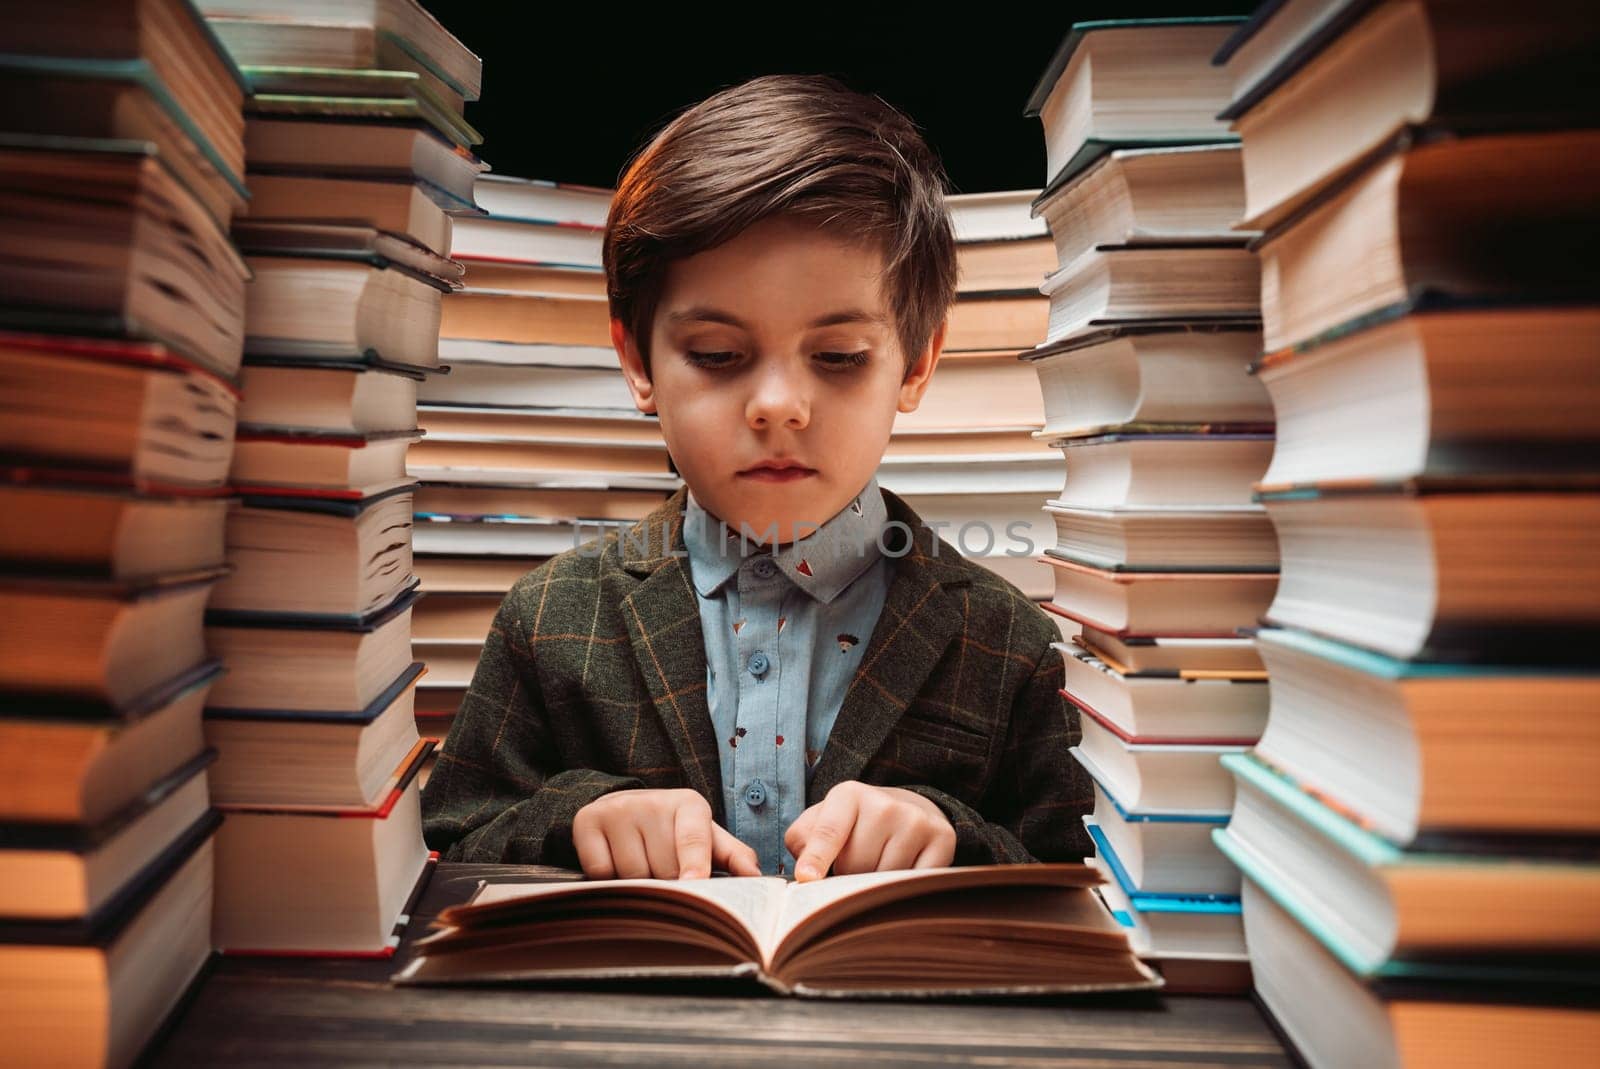 Cute little schoolboy reading interesting book in library between stacks of books literature. Education concept, time for kids pleasure. High quality photo